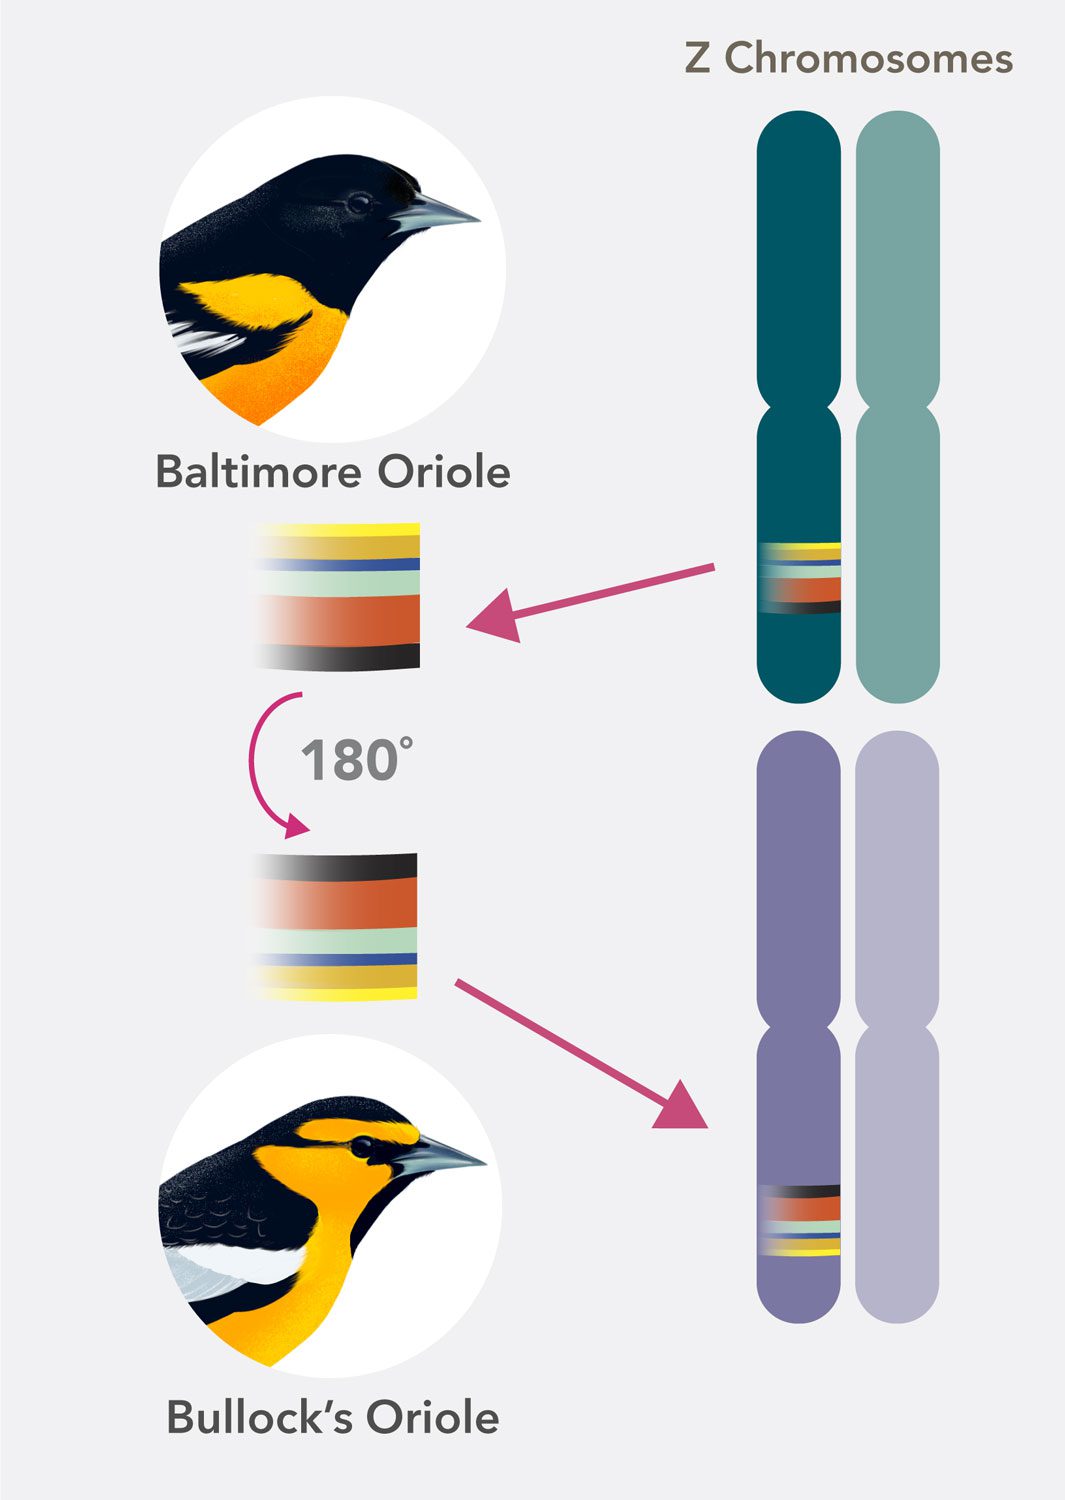 illustration of a chromosomal inversion with a gene sequence flipped around between a Bullock's and Baltimore Oriole.